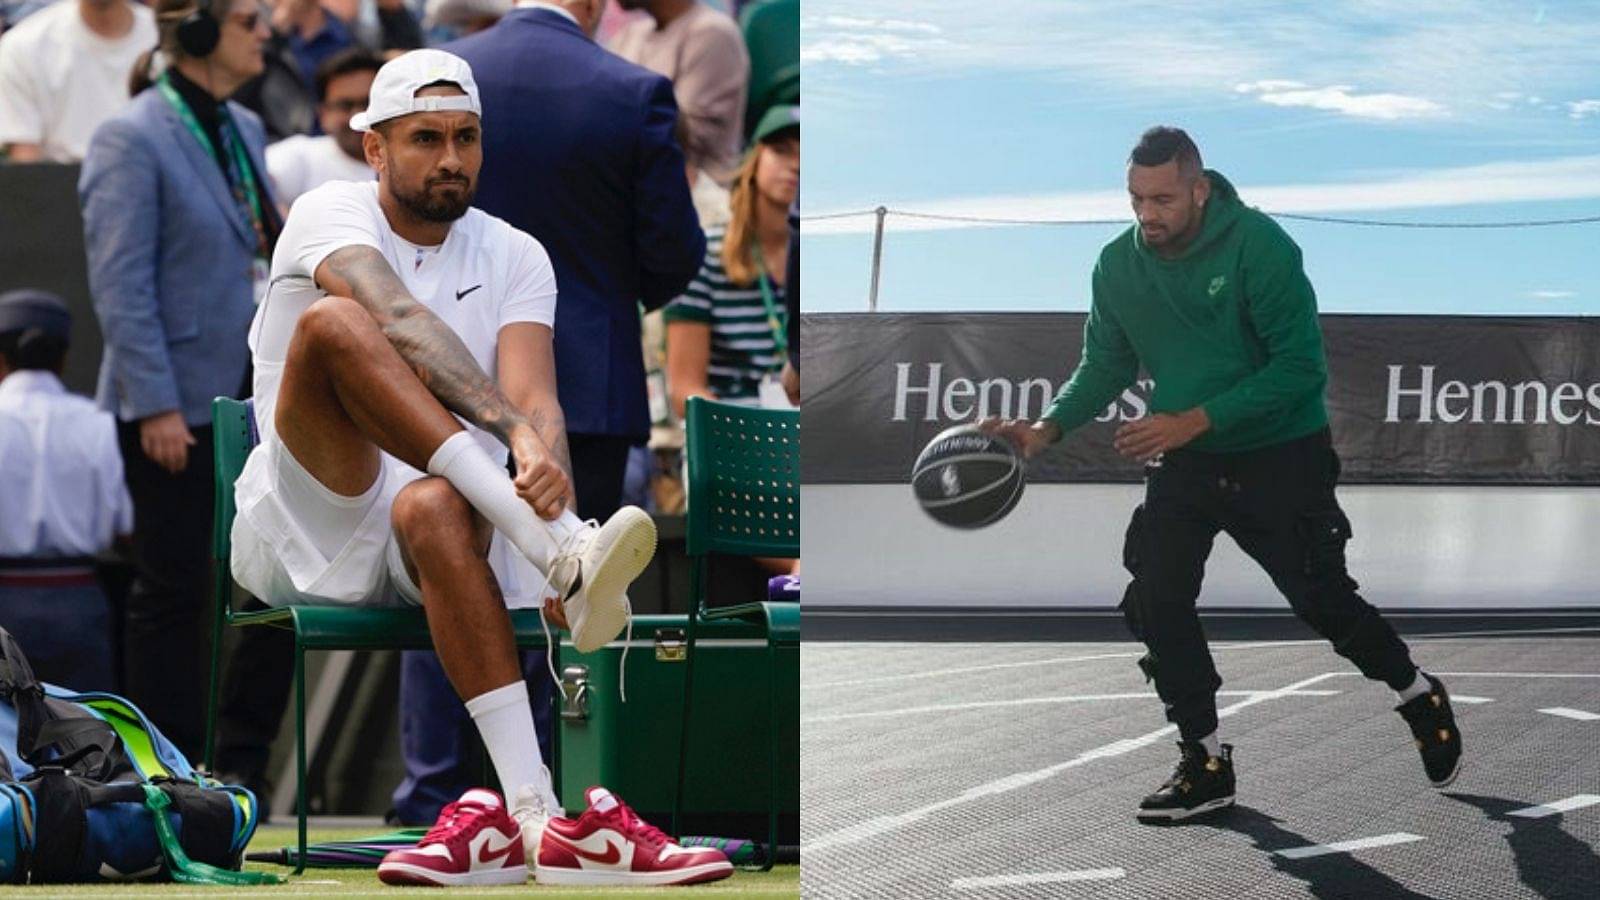 “Basketball is my meditation but at the same time, it’s good fitness as well”: Nick Kyrgios gave major credit to basketball as he reached Wimbledon Finals